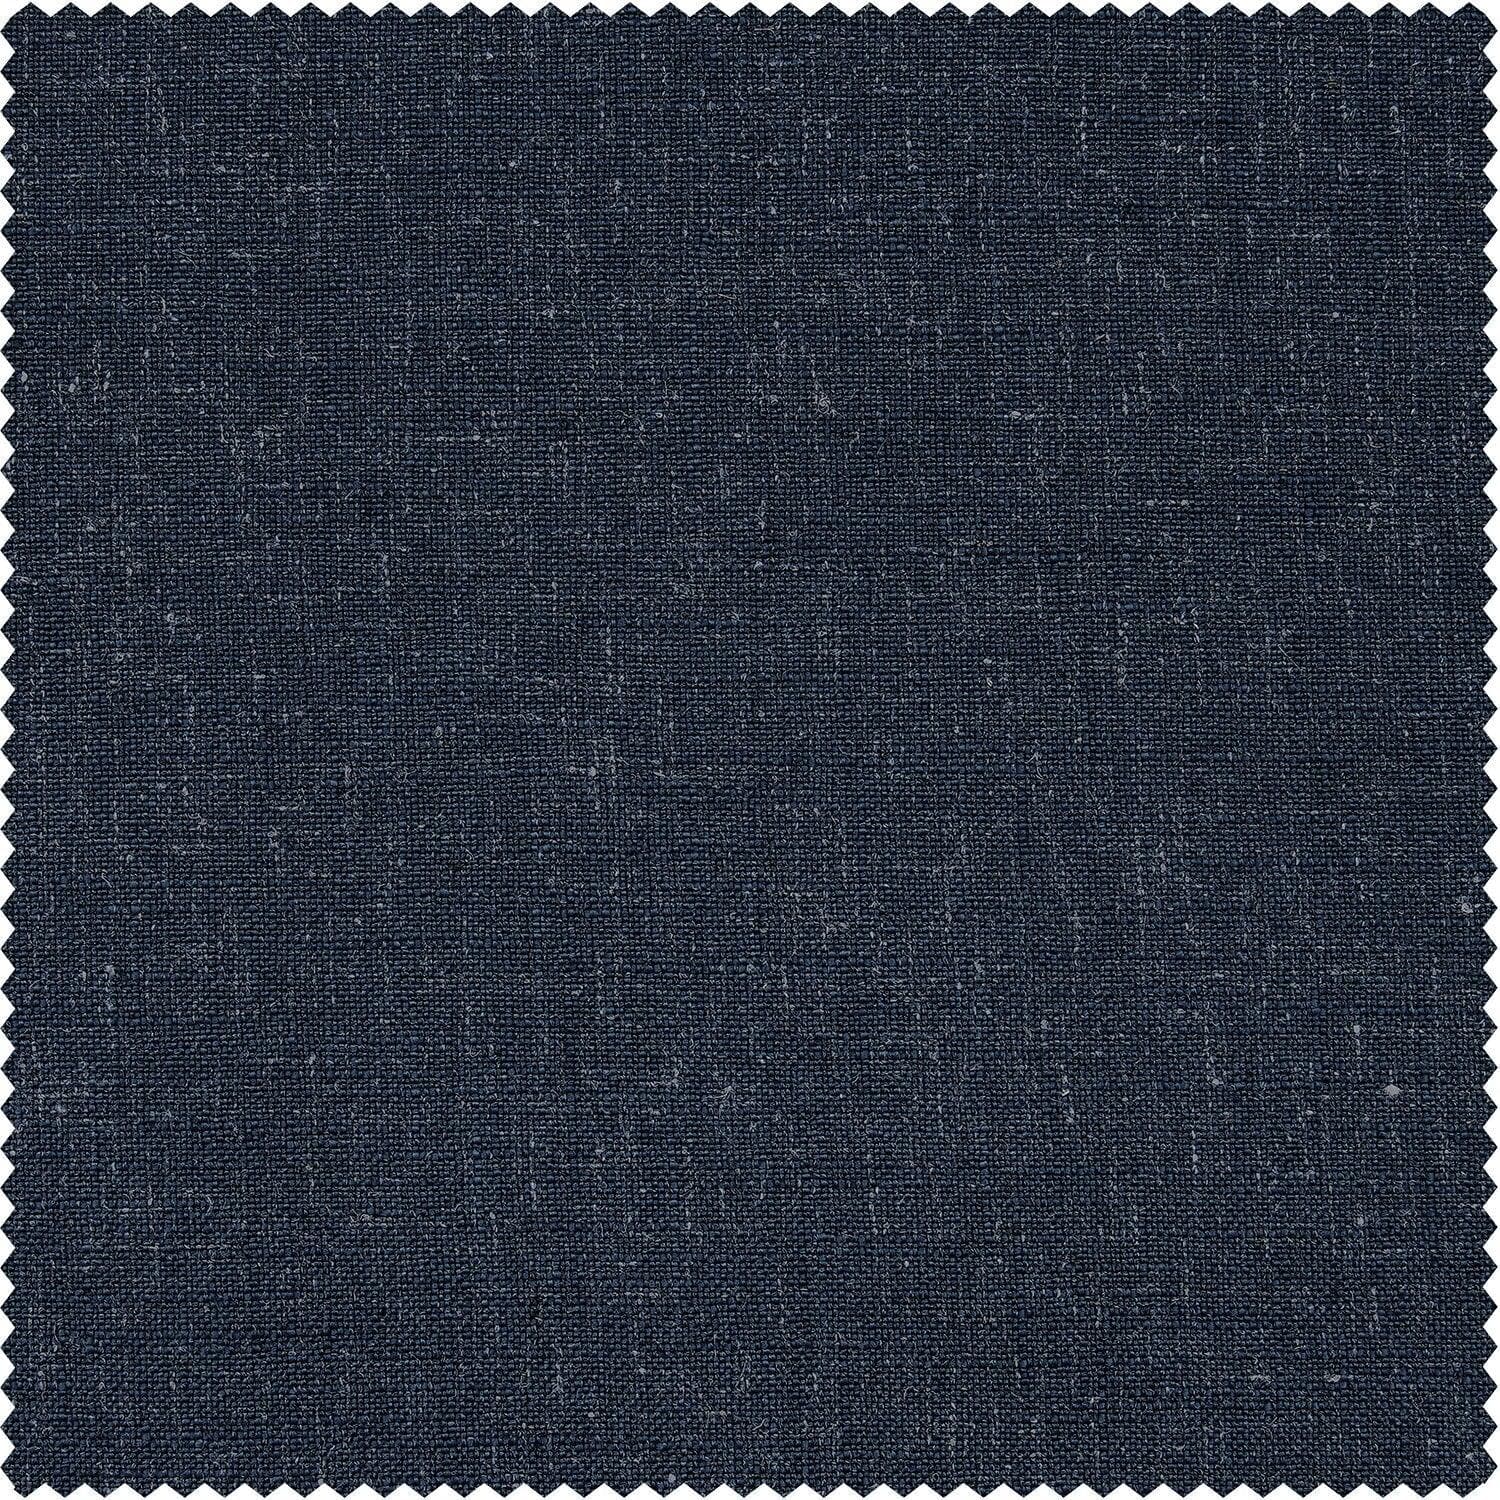 British Navy French Pleat Heavy Faux Linen Curtain